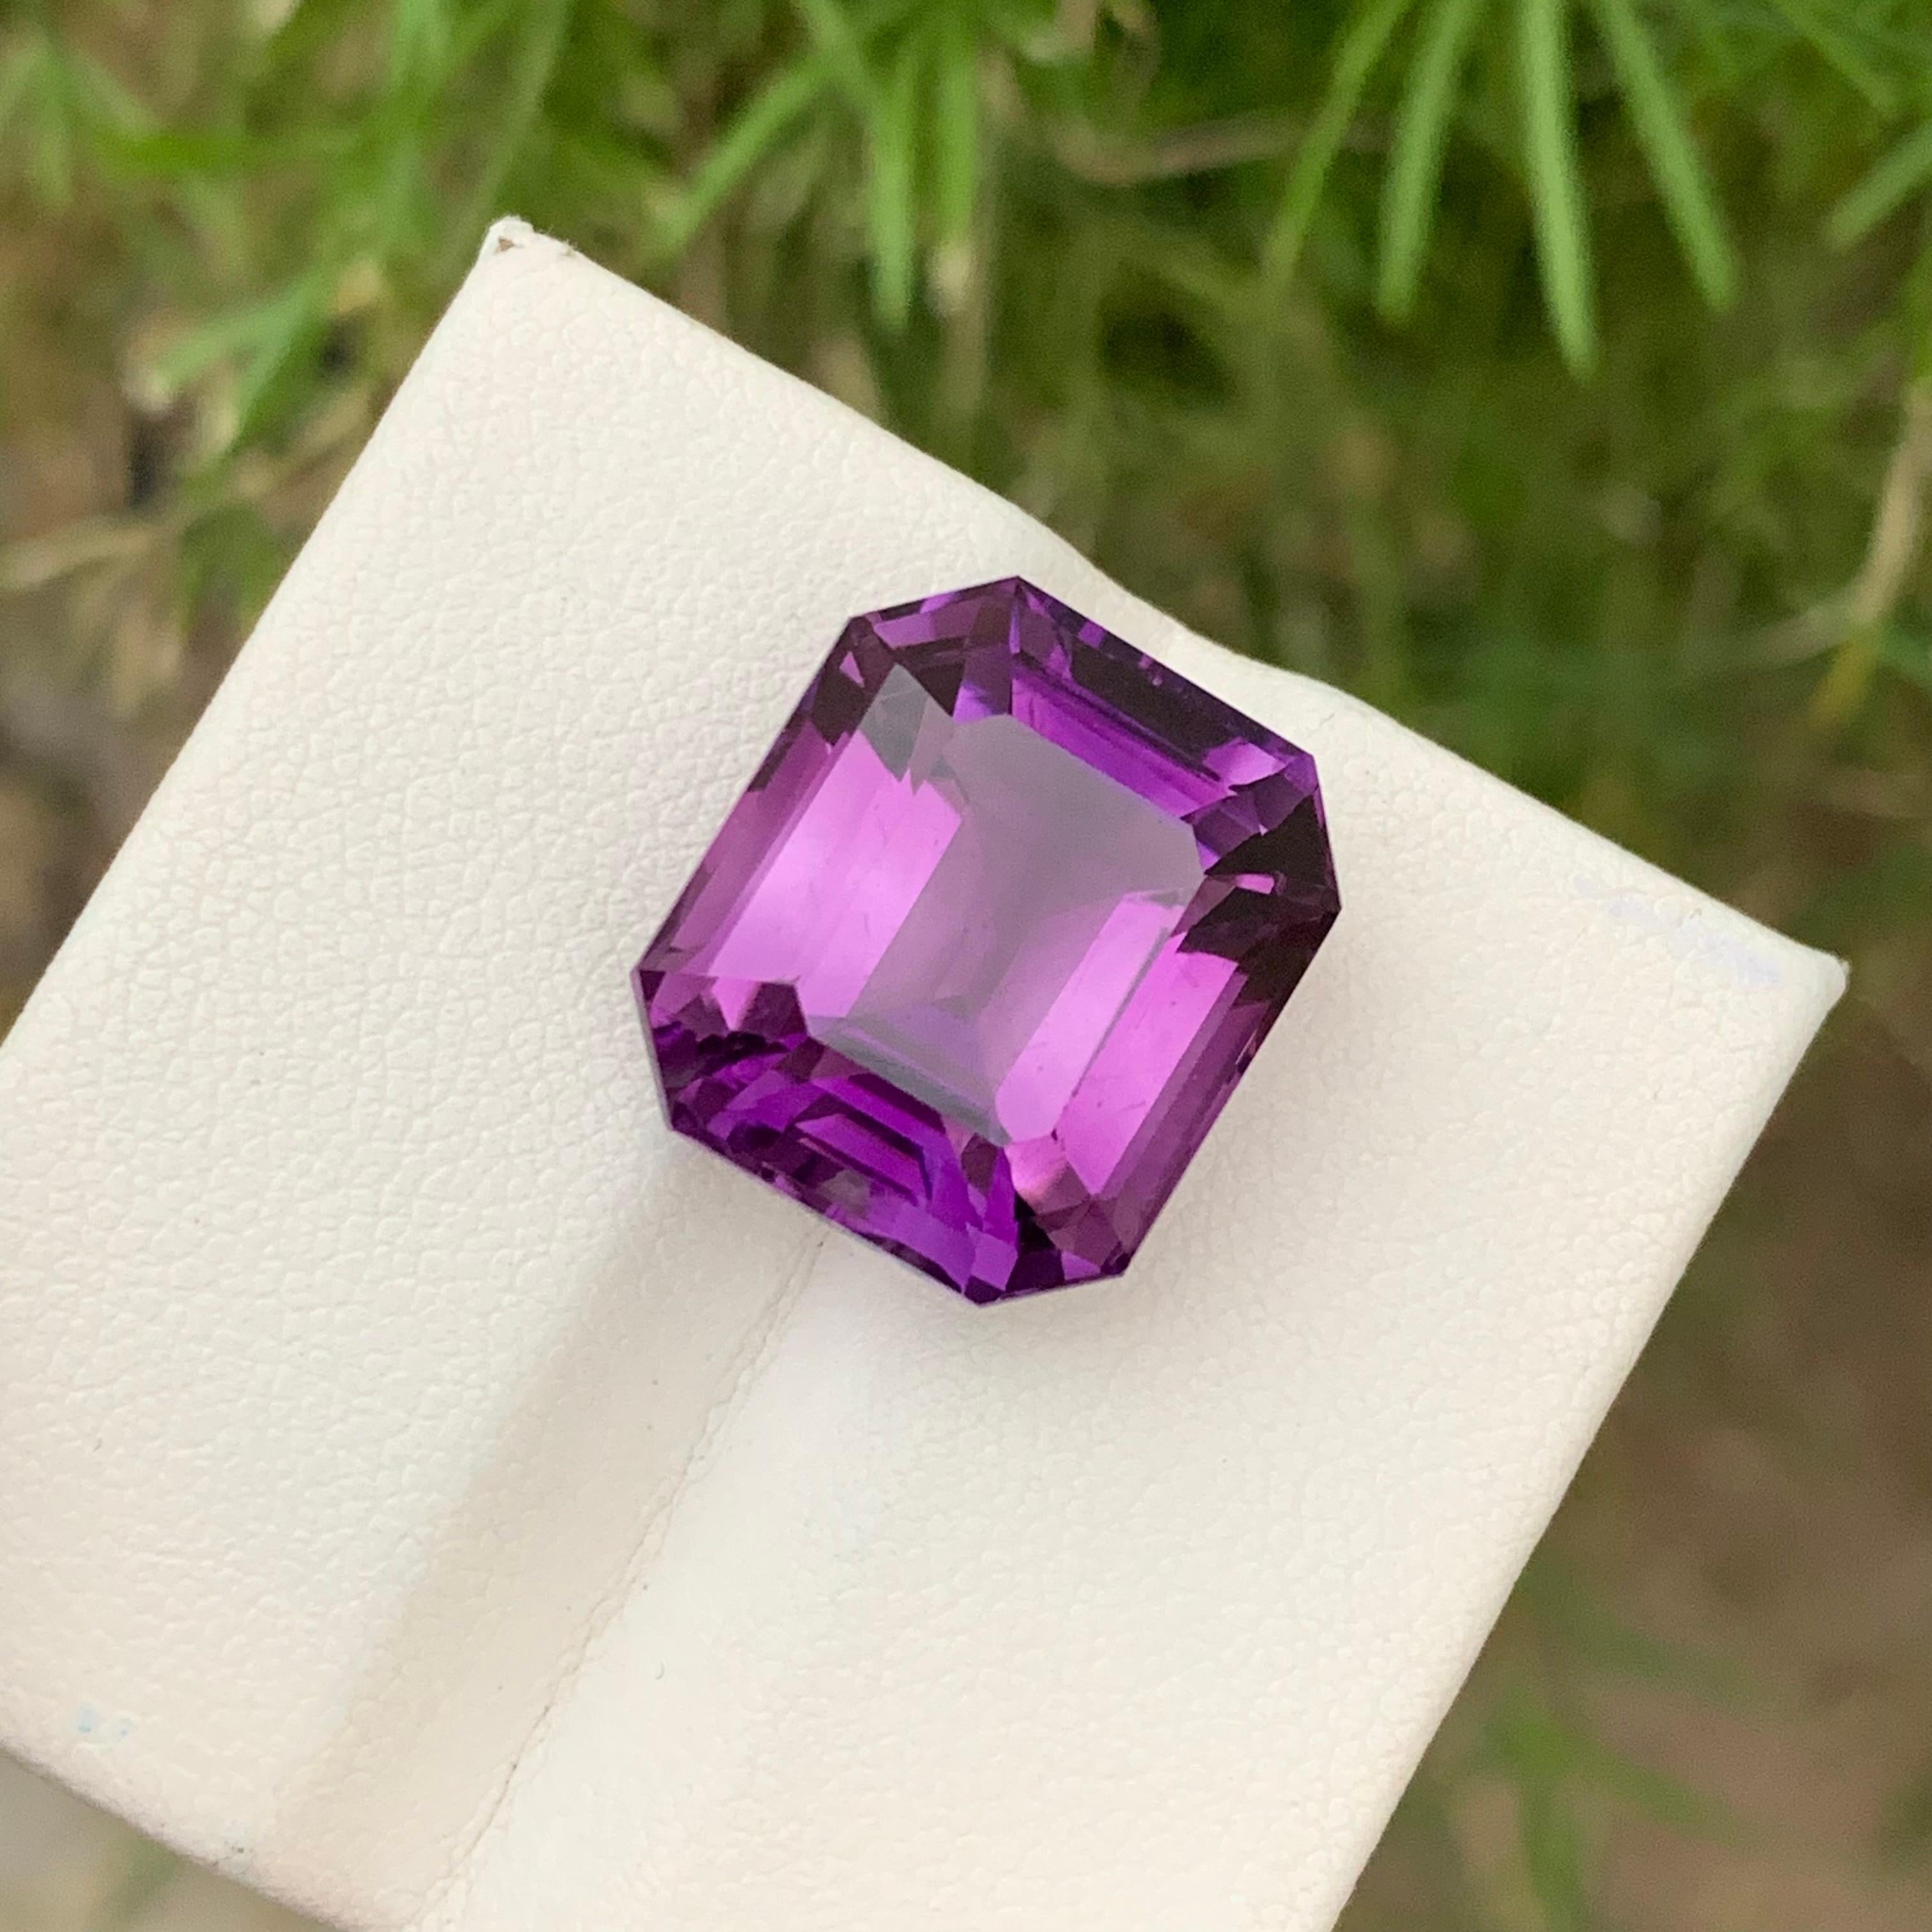 19.0 Carats Natural Loose Deep Purple Amethyst Gemstone From Brazil Mine For Sale 3